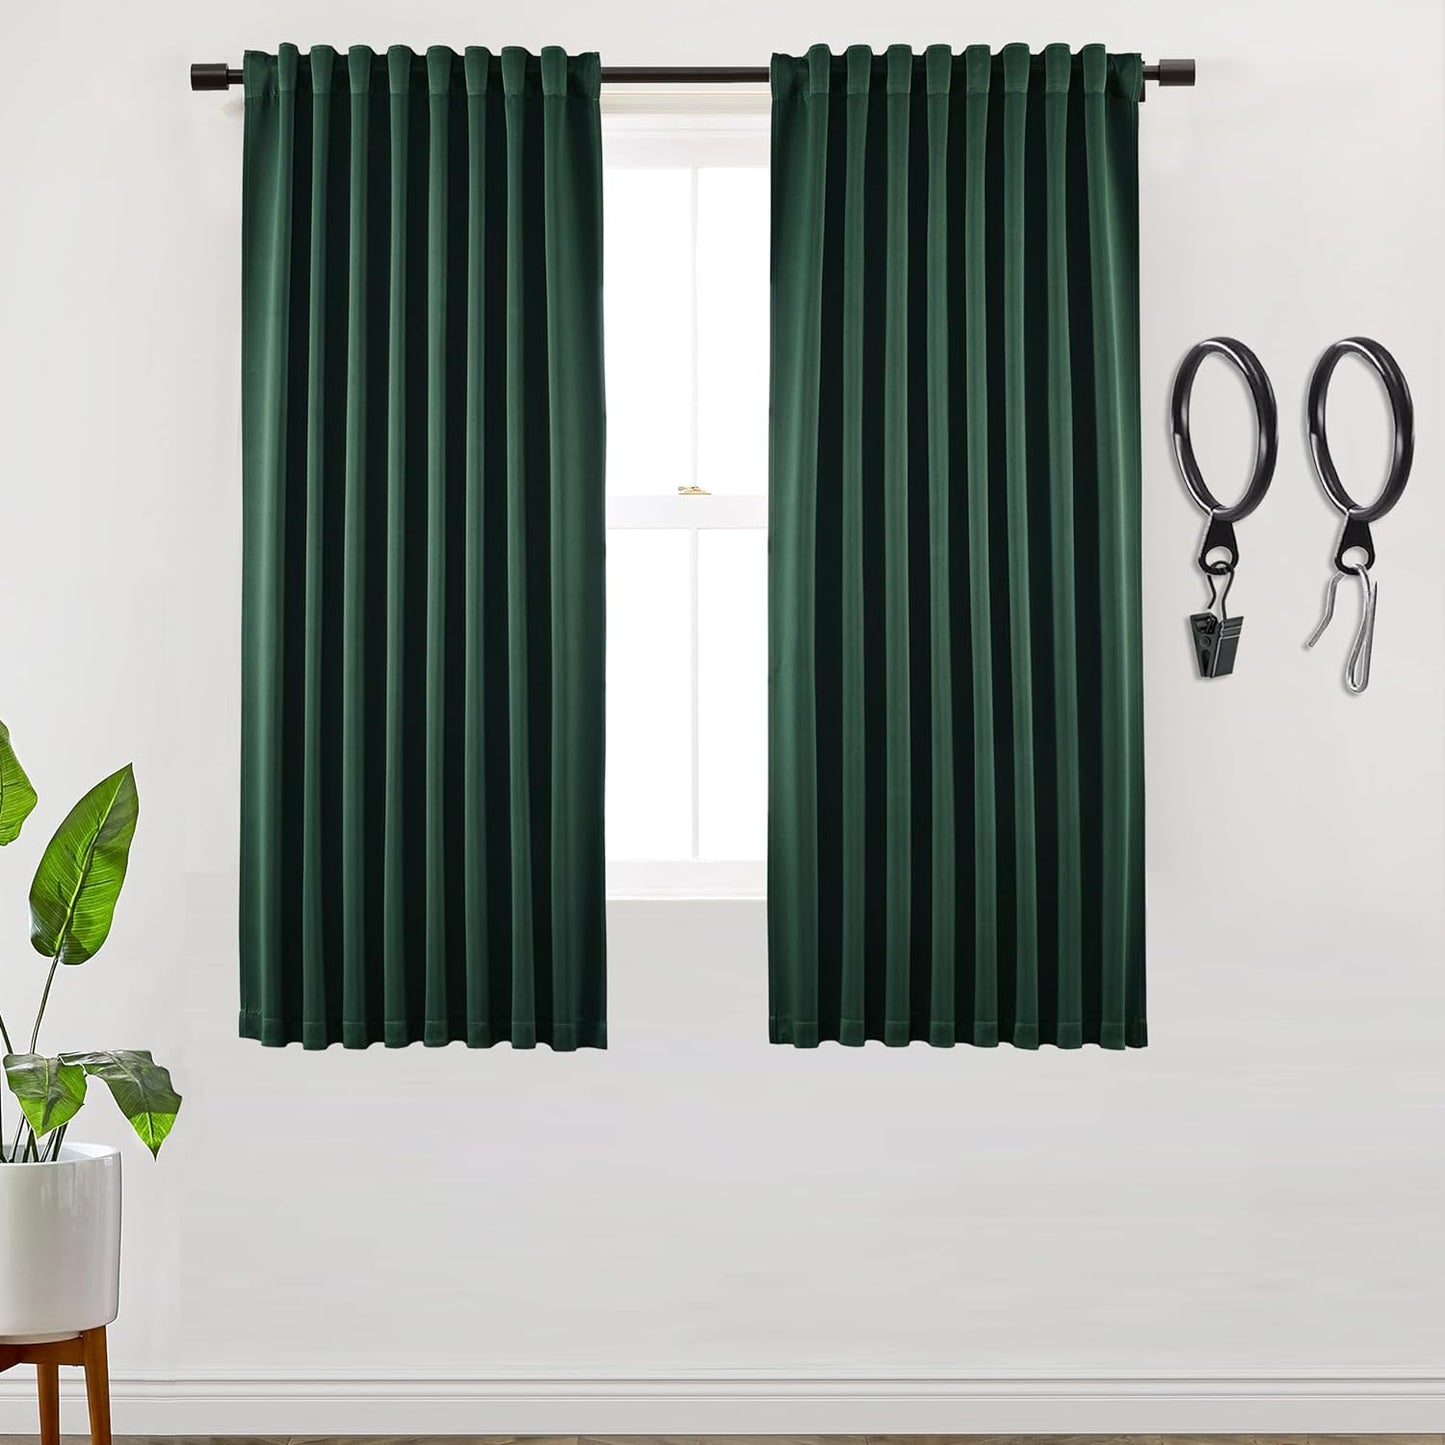 SHINELAND Beige Room Darkening Curtains 105 Inches Long for Living Room Bedroom,Cortinas Para Cuarto Bloqueador De Luz,Thermal Insulated Back Tab Pleat Blackout Curtains for Sunroom Patio Door Indoor  SHINELAND Emerald Green 2X(52"Wx63"L) 